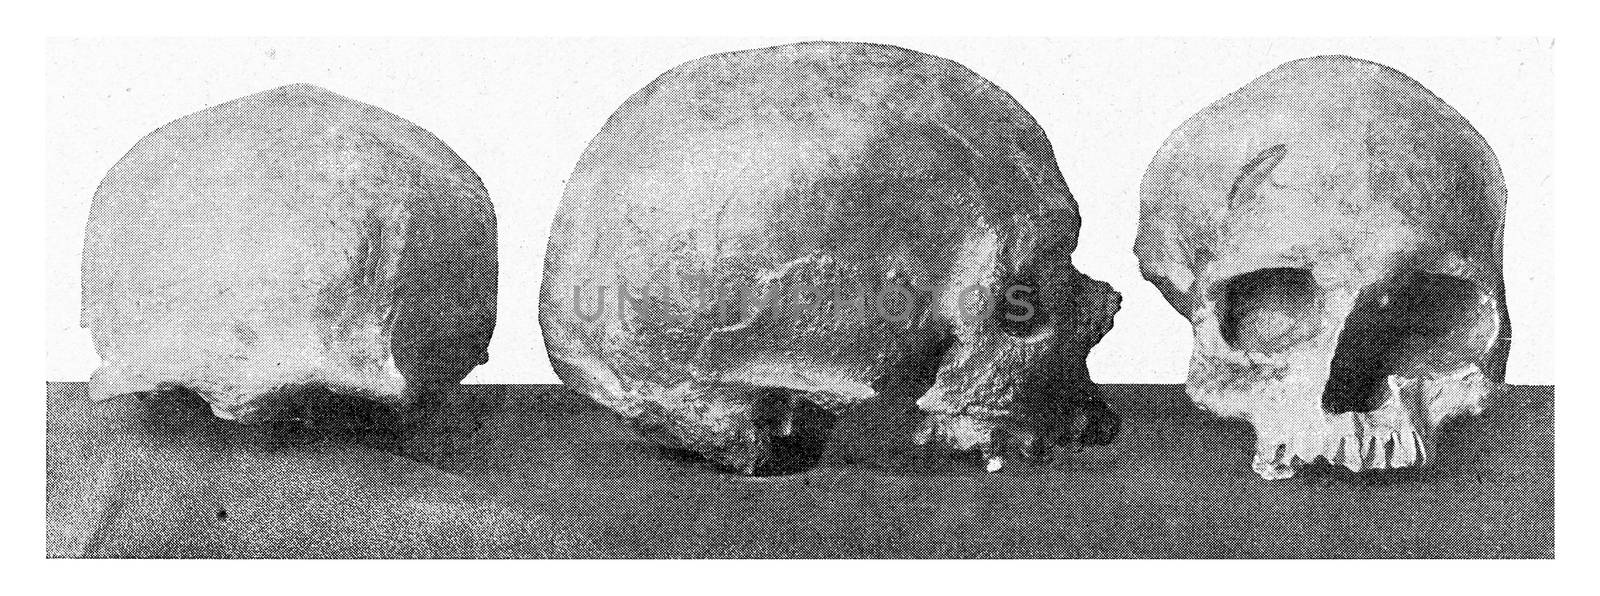 Crumbling skull of Cro magnon in the valley of the Vezere, vintage engraved illustration. From the Universe and Humanity, 1910.
